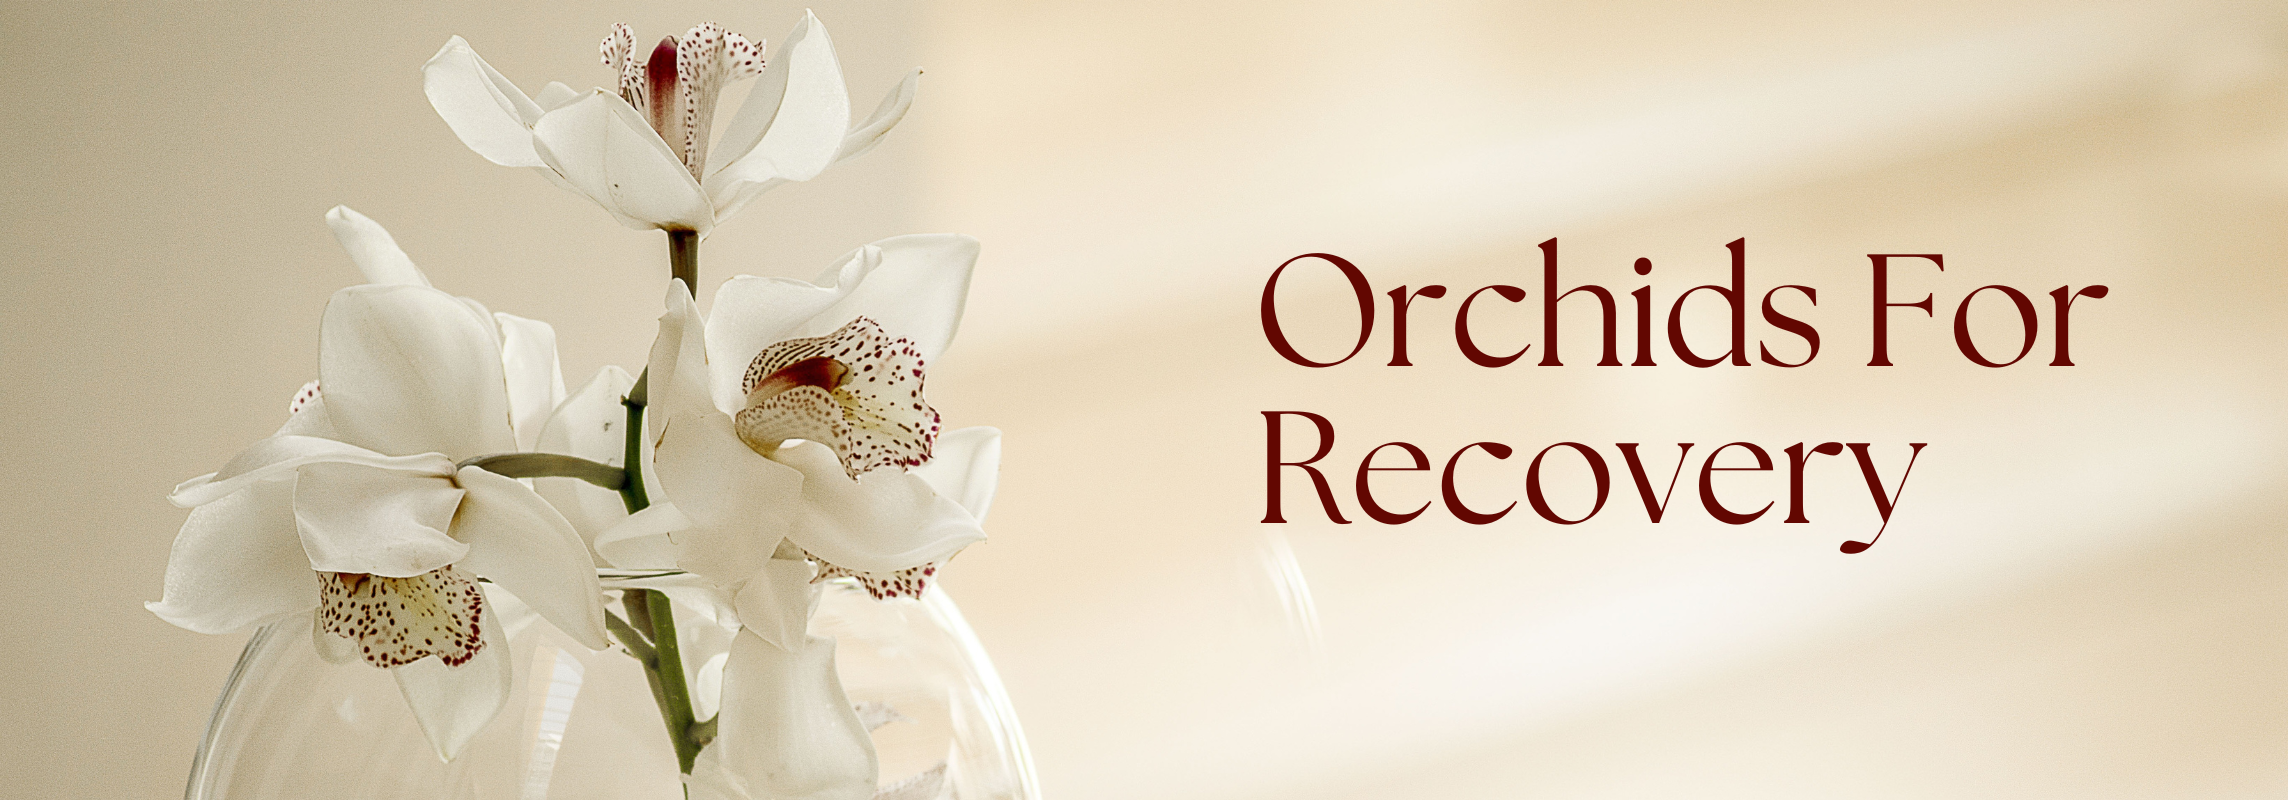 orchids for recovery